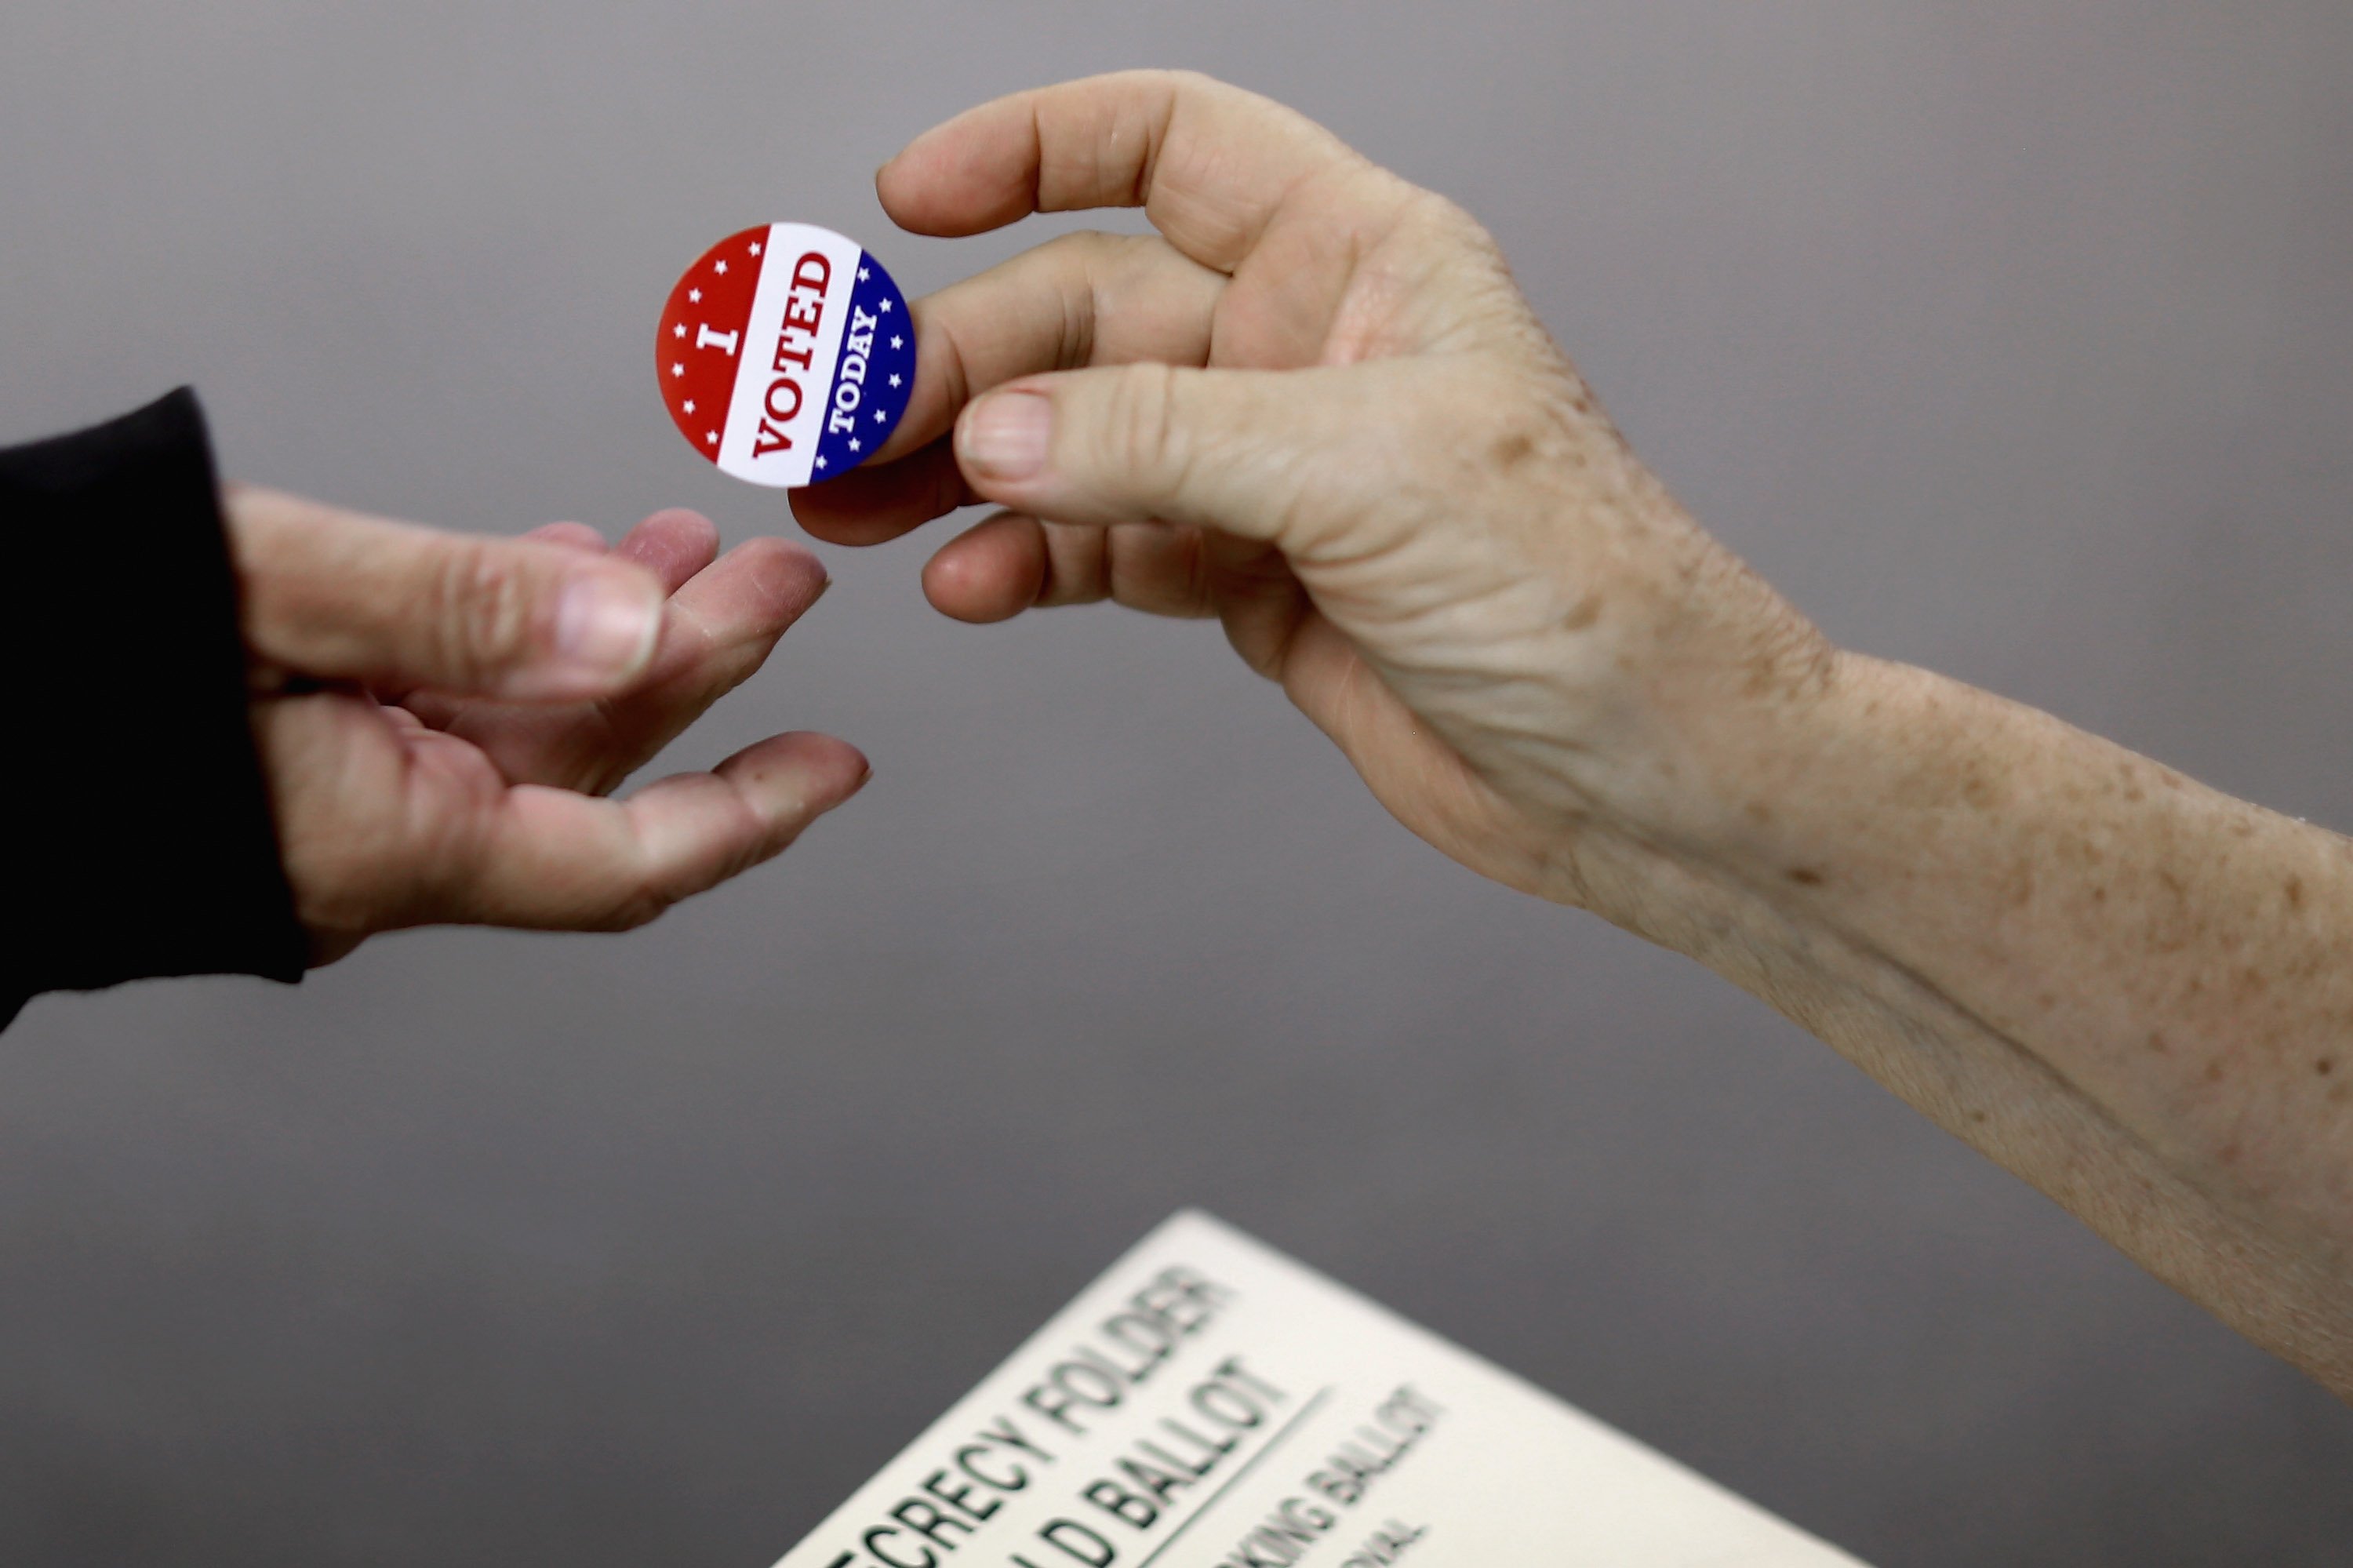 Voters get an 'I VOTED TODAY' sticker after casting their ballots on election day at the Red Oak Fire Department on Nov. 4, 2014 in Red Oak, Iowa. (Chip Somodevilla—Getty Images)